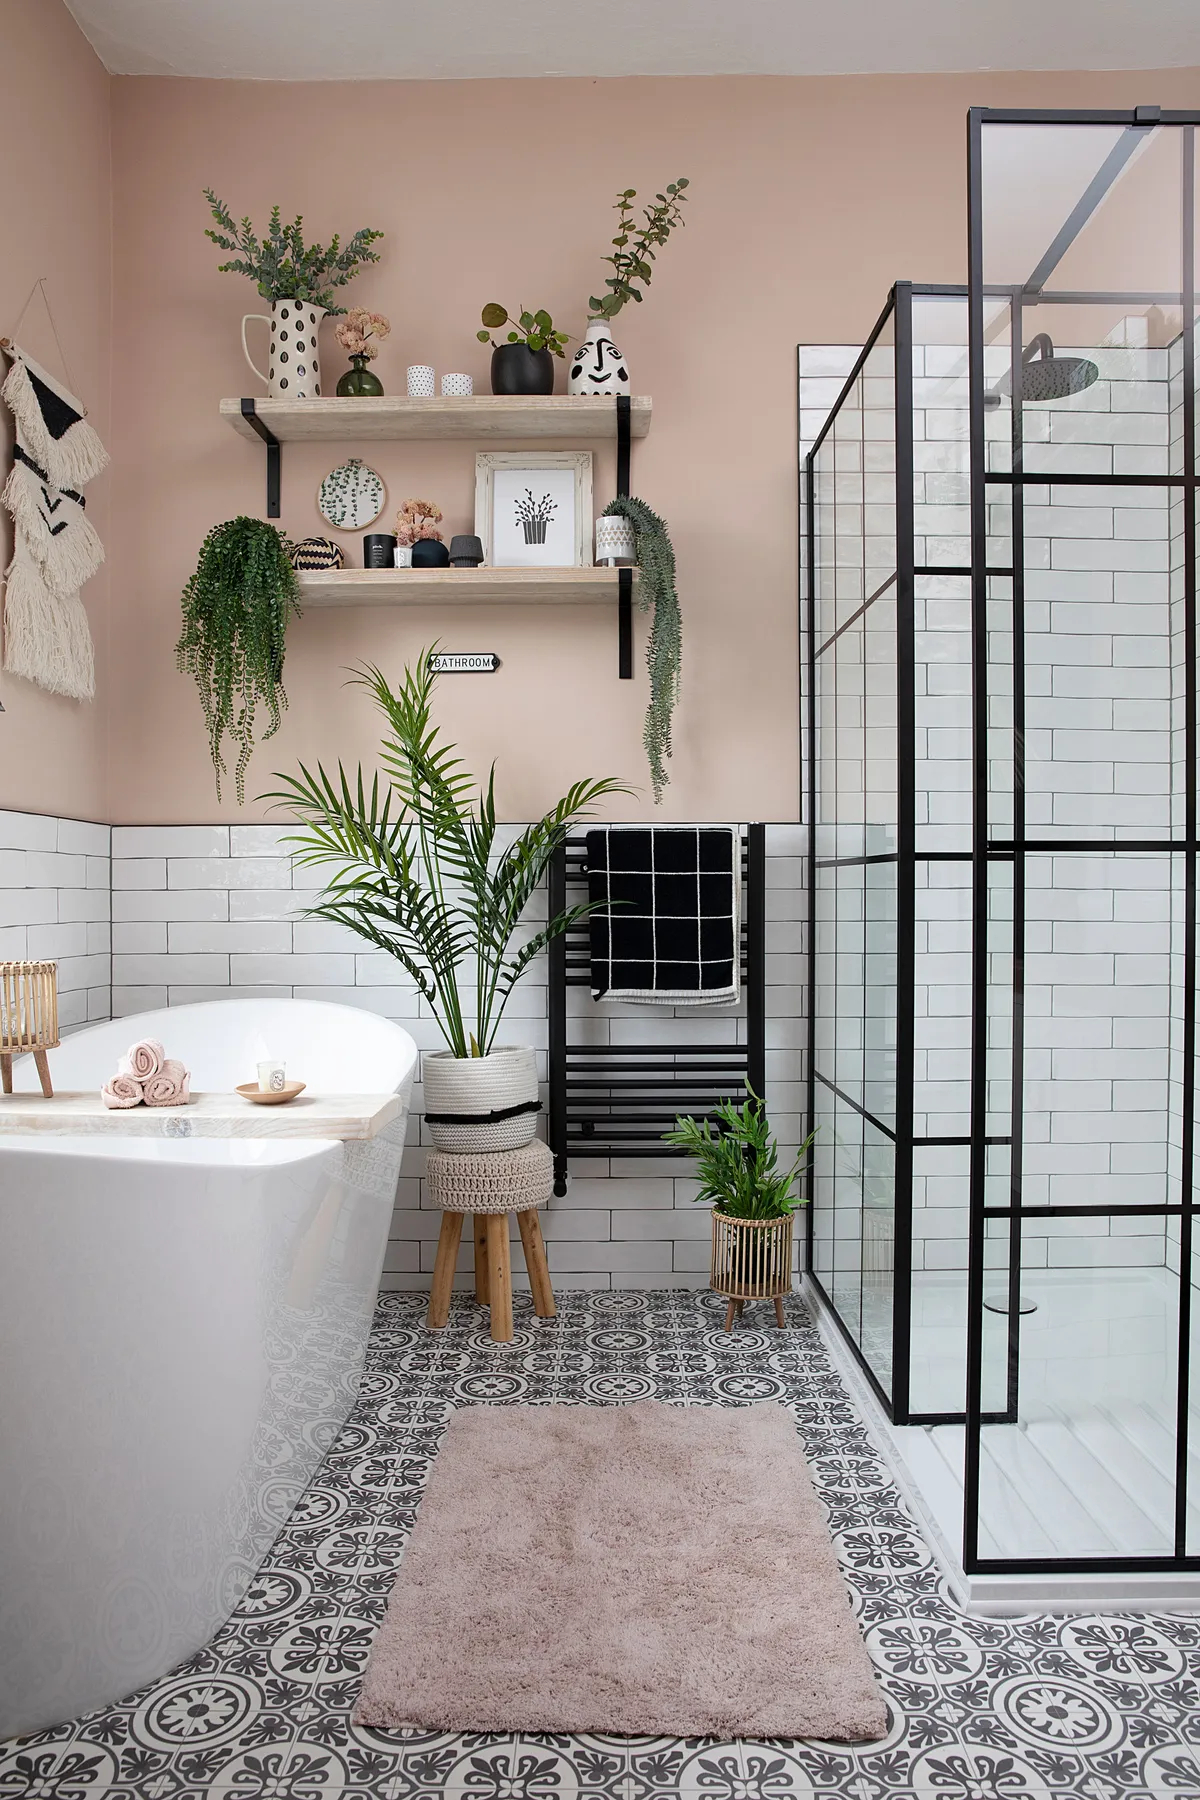 The previous room layout featured both a bath and cramped shower along the back wall with partition in-between. Moving the bath under the window has unlocked the space’s potential